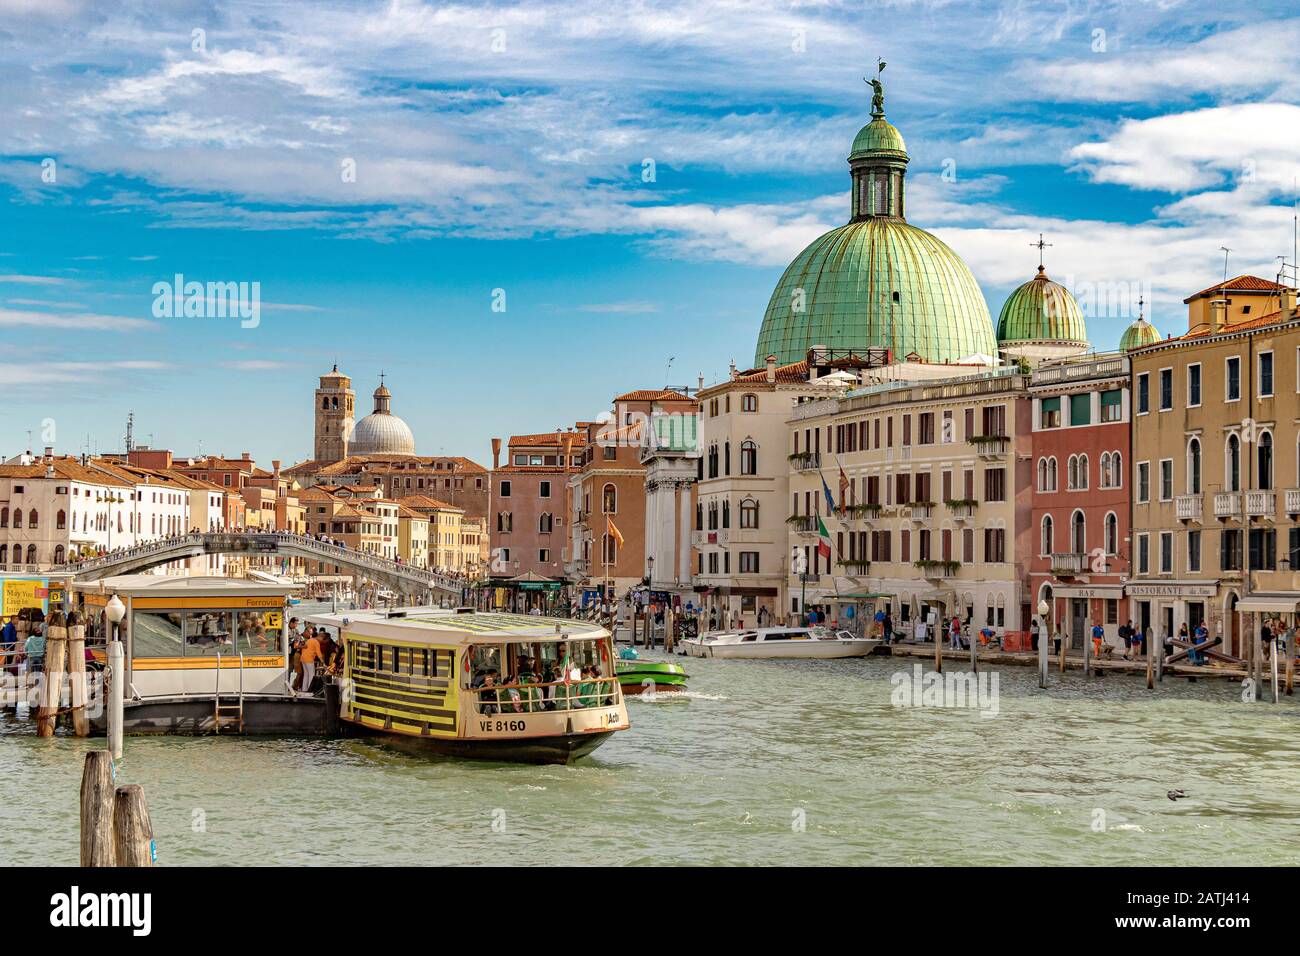 Vaporetto or water buses on The Grand Canal near Santa Lucia Station with the green dome of San Simeone Piccolo Church dominating the skyline ,Venice Stock Photo